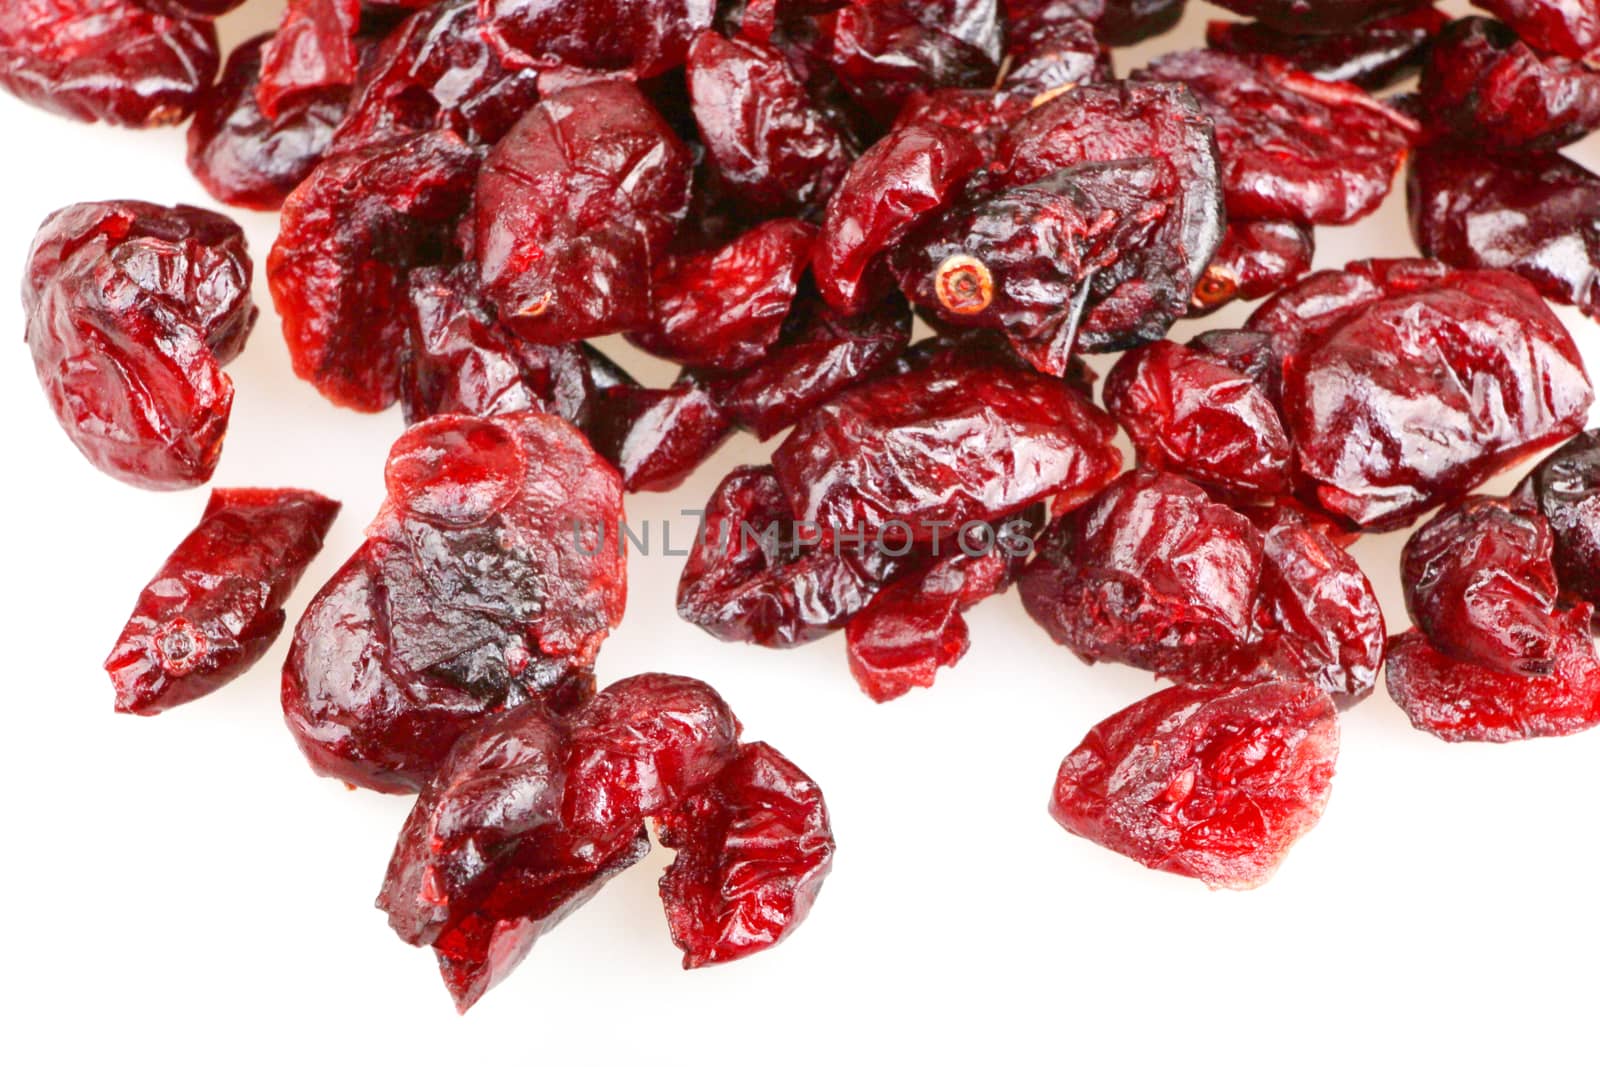 Close-up Of A Pile Of Cranberries On A White Background